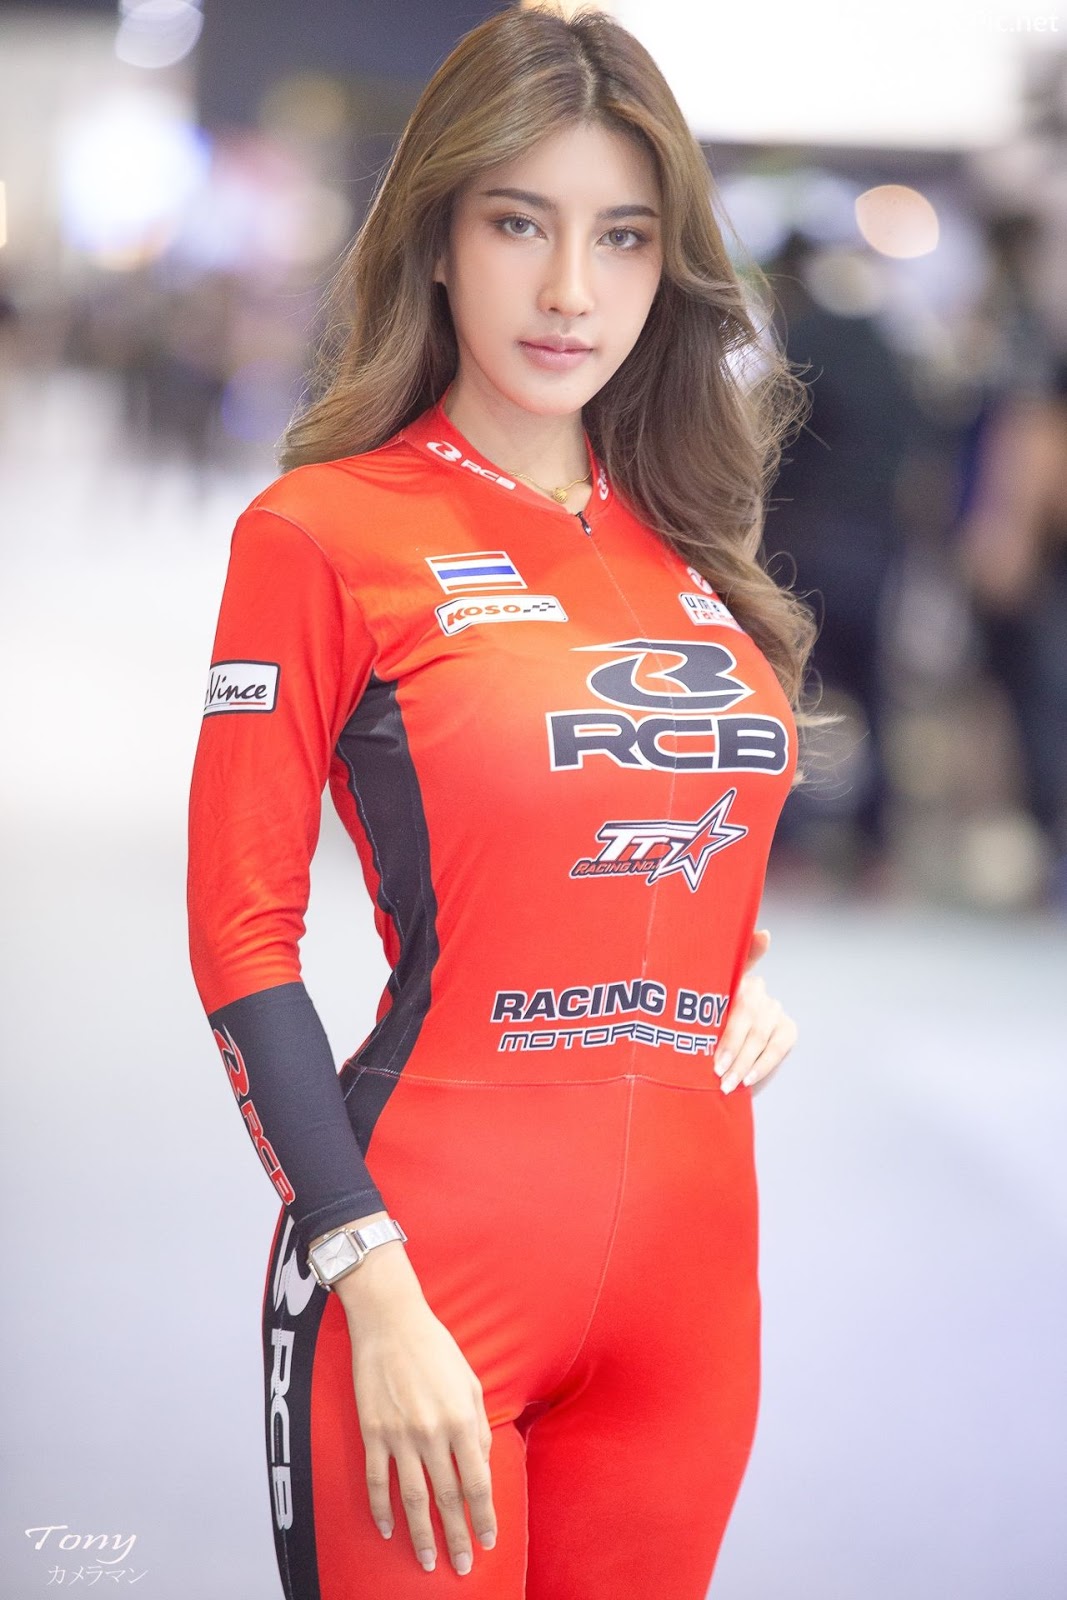 Image-Thailand-Hot-Model-Thai-Racing-Girl-At-Motor-Expo-2019-TruePic.net- Picture-20